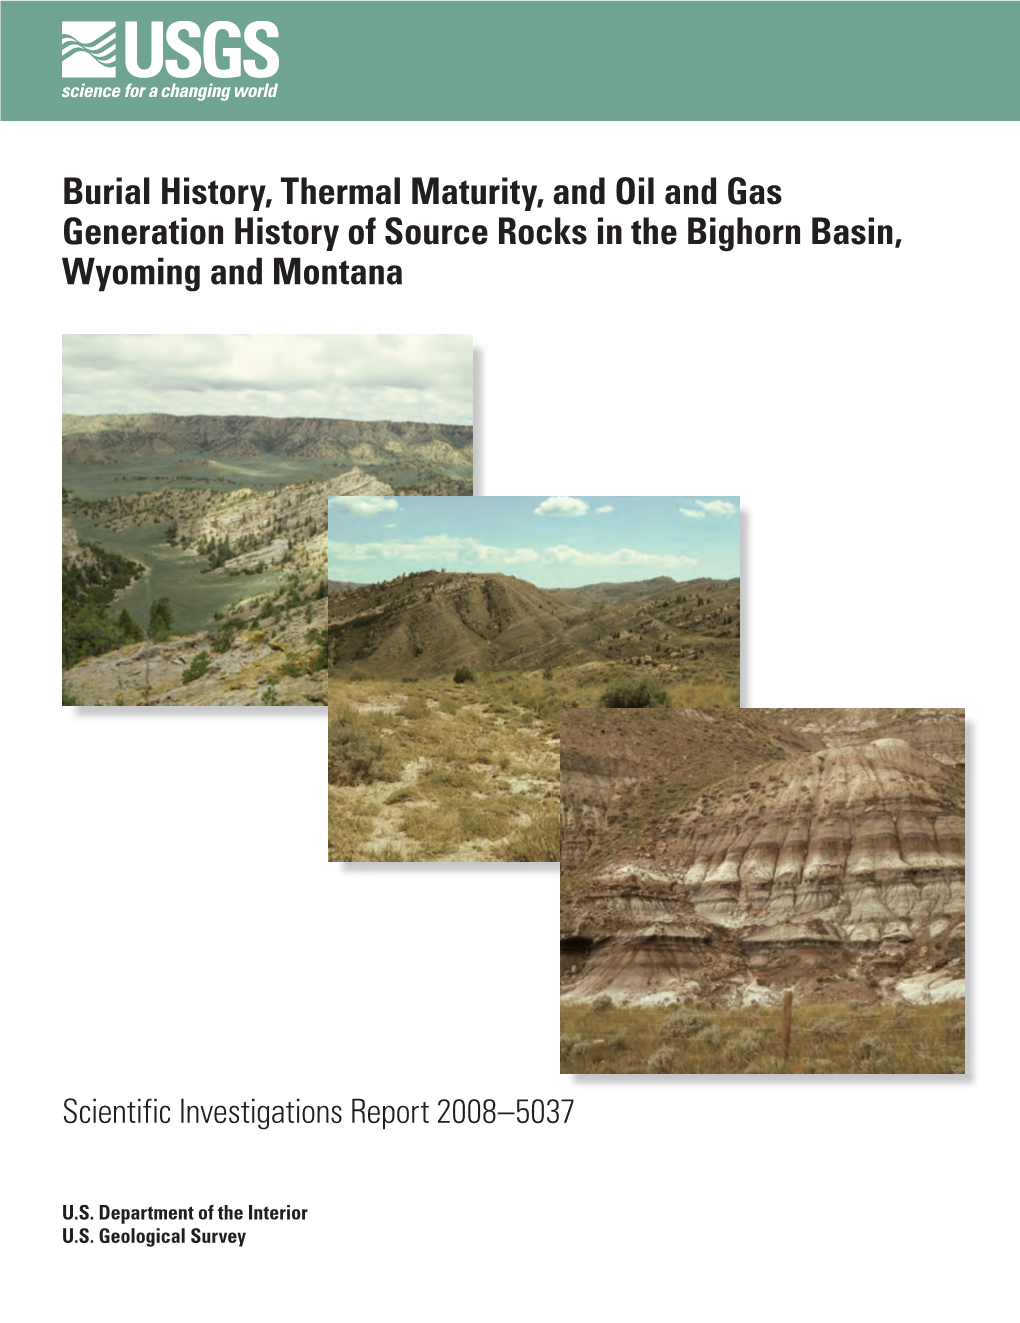 Burial History, Thermal Maturity, and Oil and Gas Generation History of Source Rocks in the Bighorn Basin, Wyoming and Montana